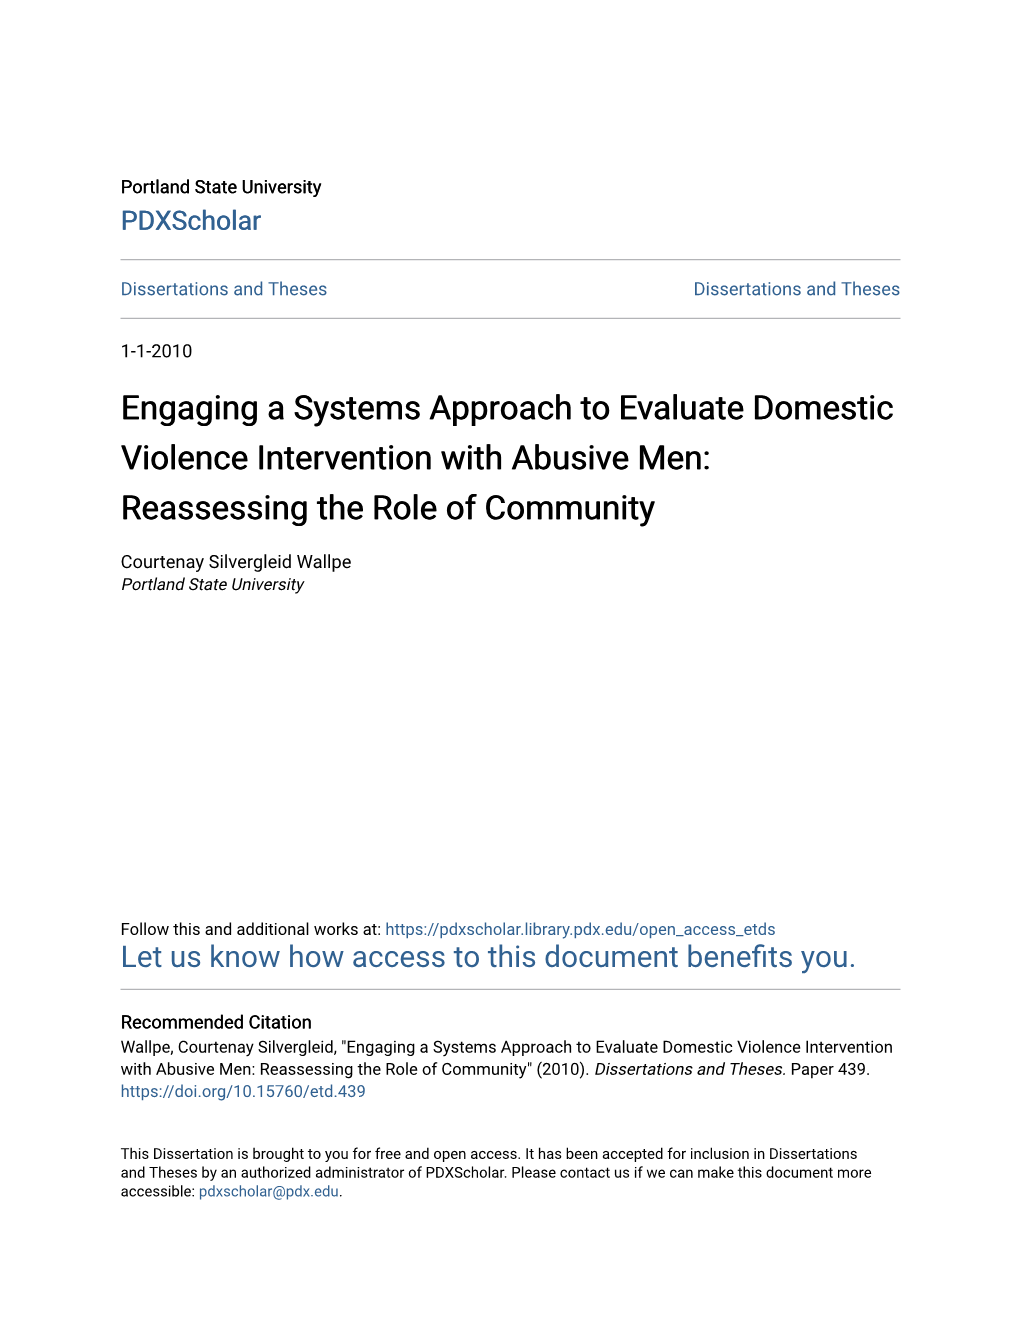 Engaging a Systems Approach to Evaluate Domestic Violence Intervention with Abusive Men: Reassessing the Role of Community